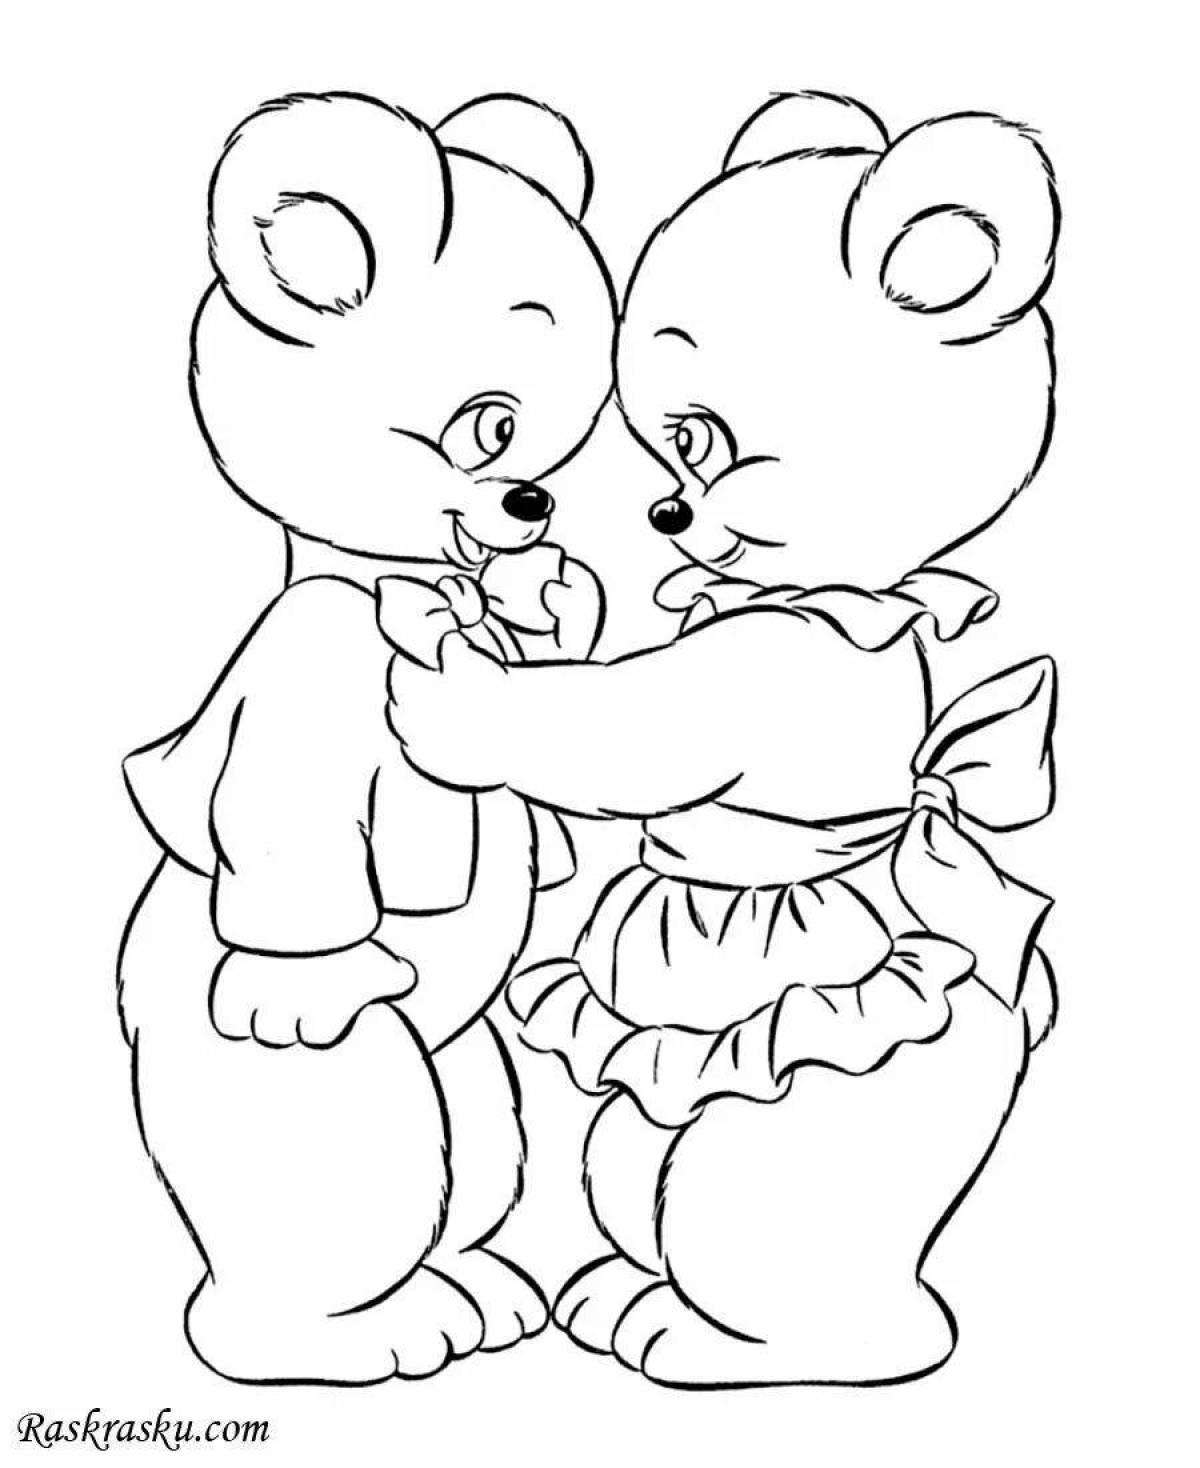 Sweet hug day coloring page for kids